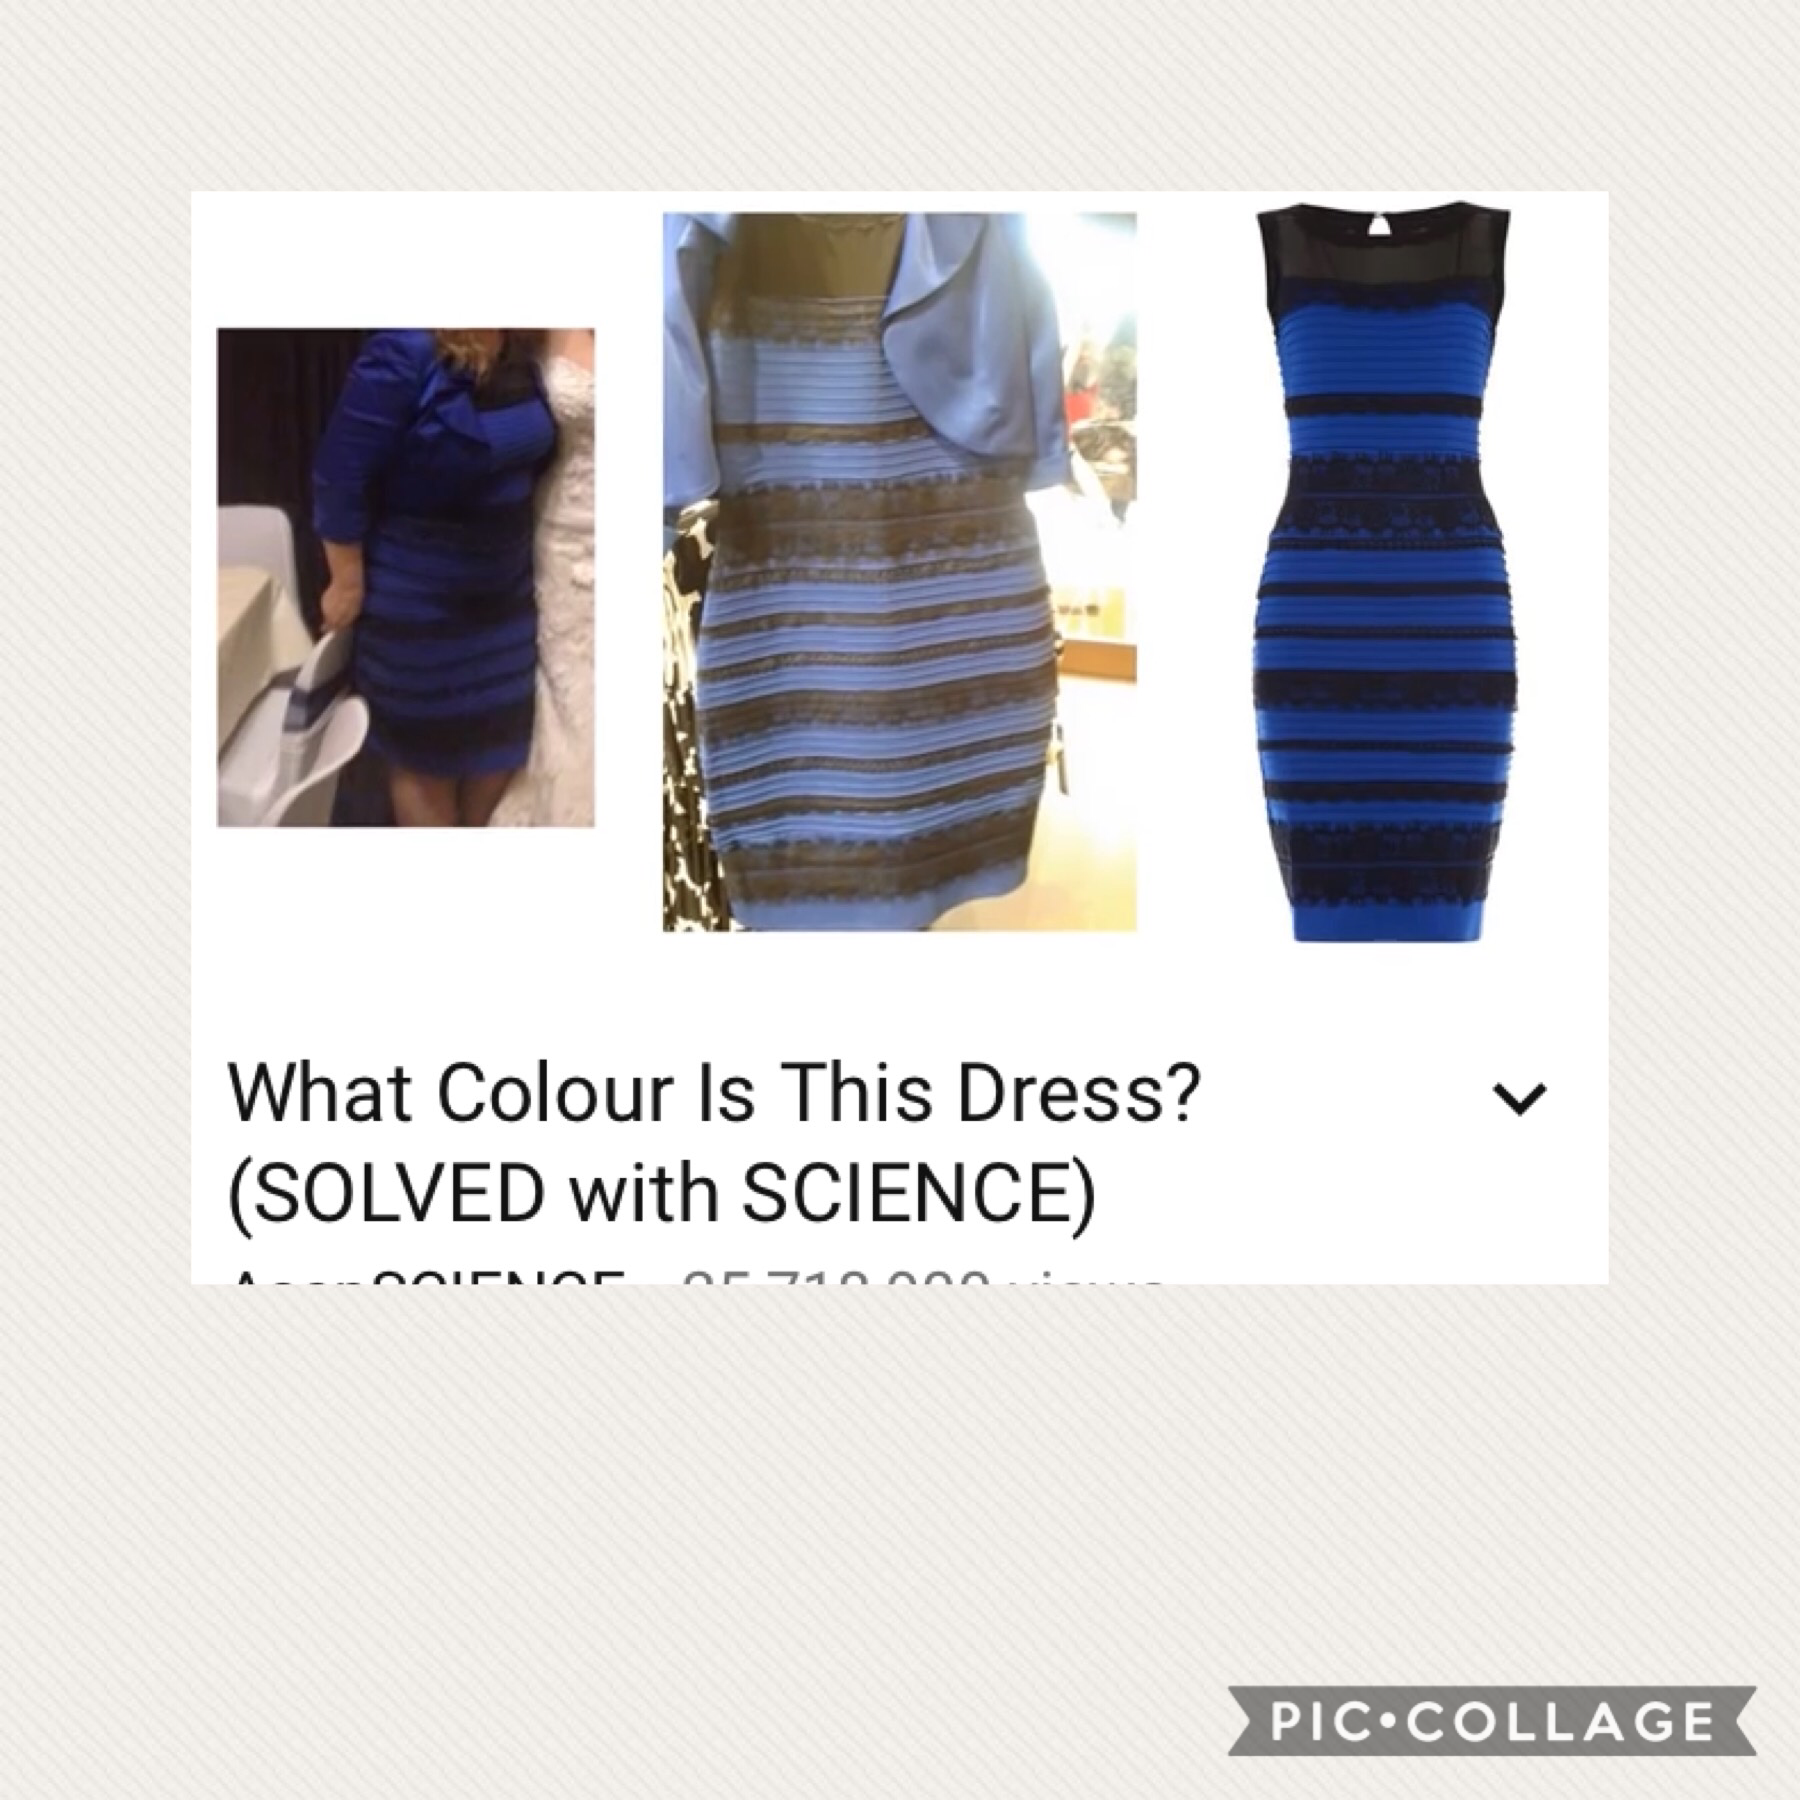 IT IS BLUE AND BLACK!!!